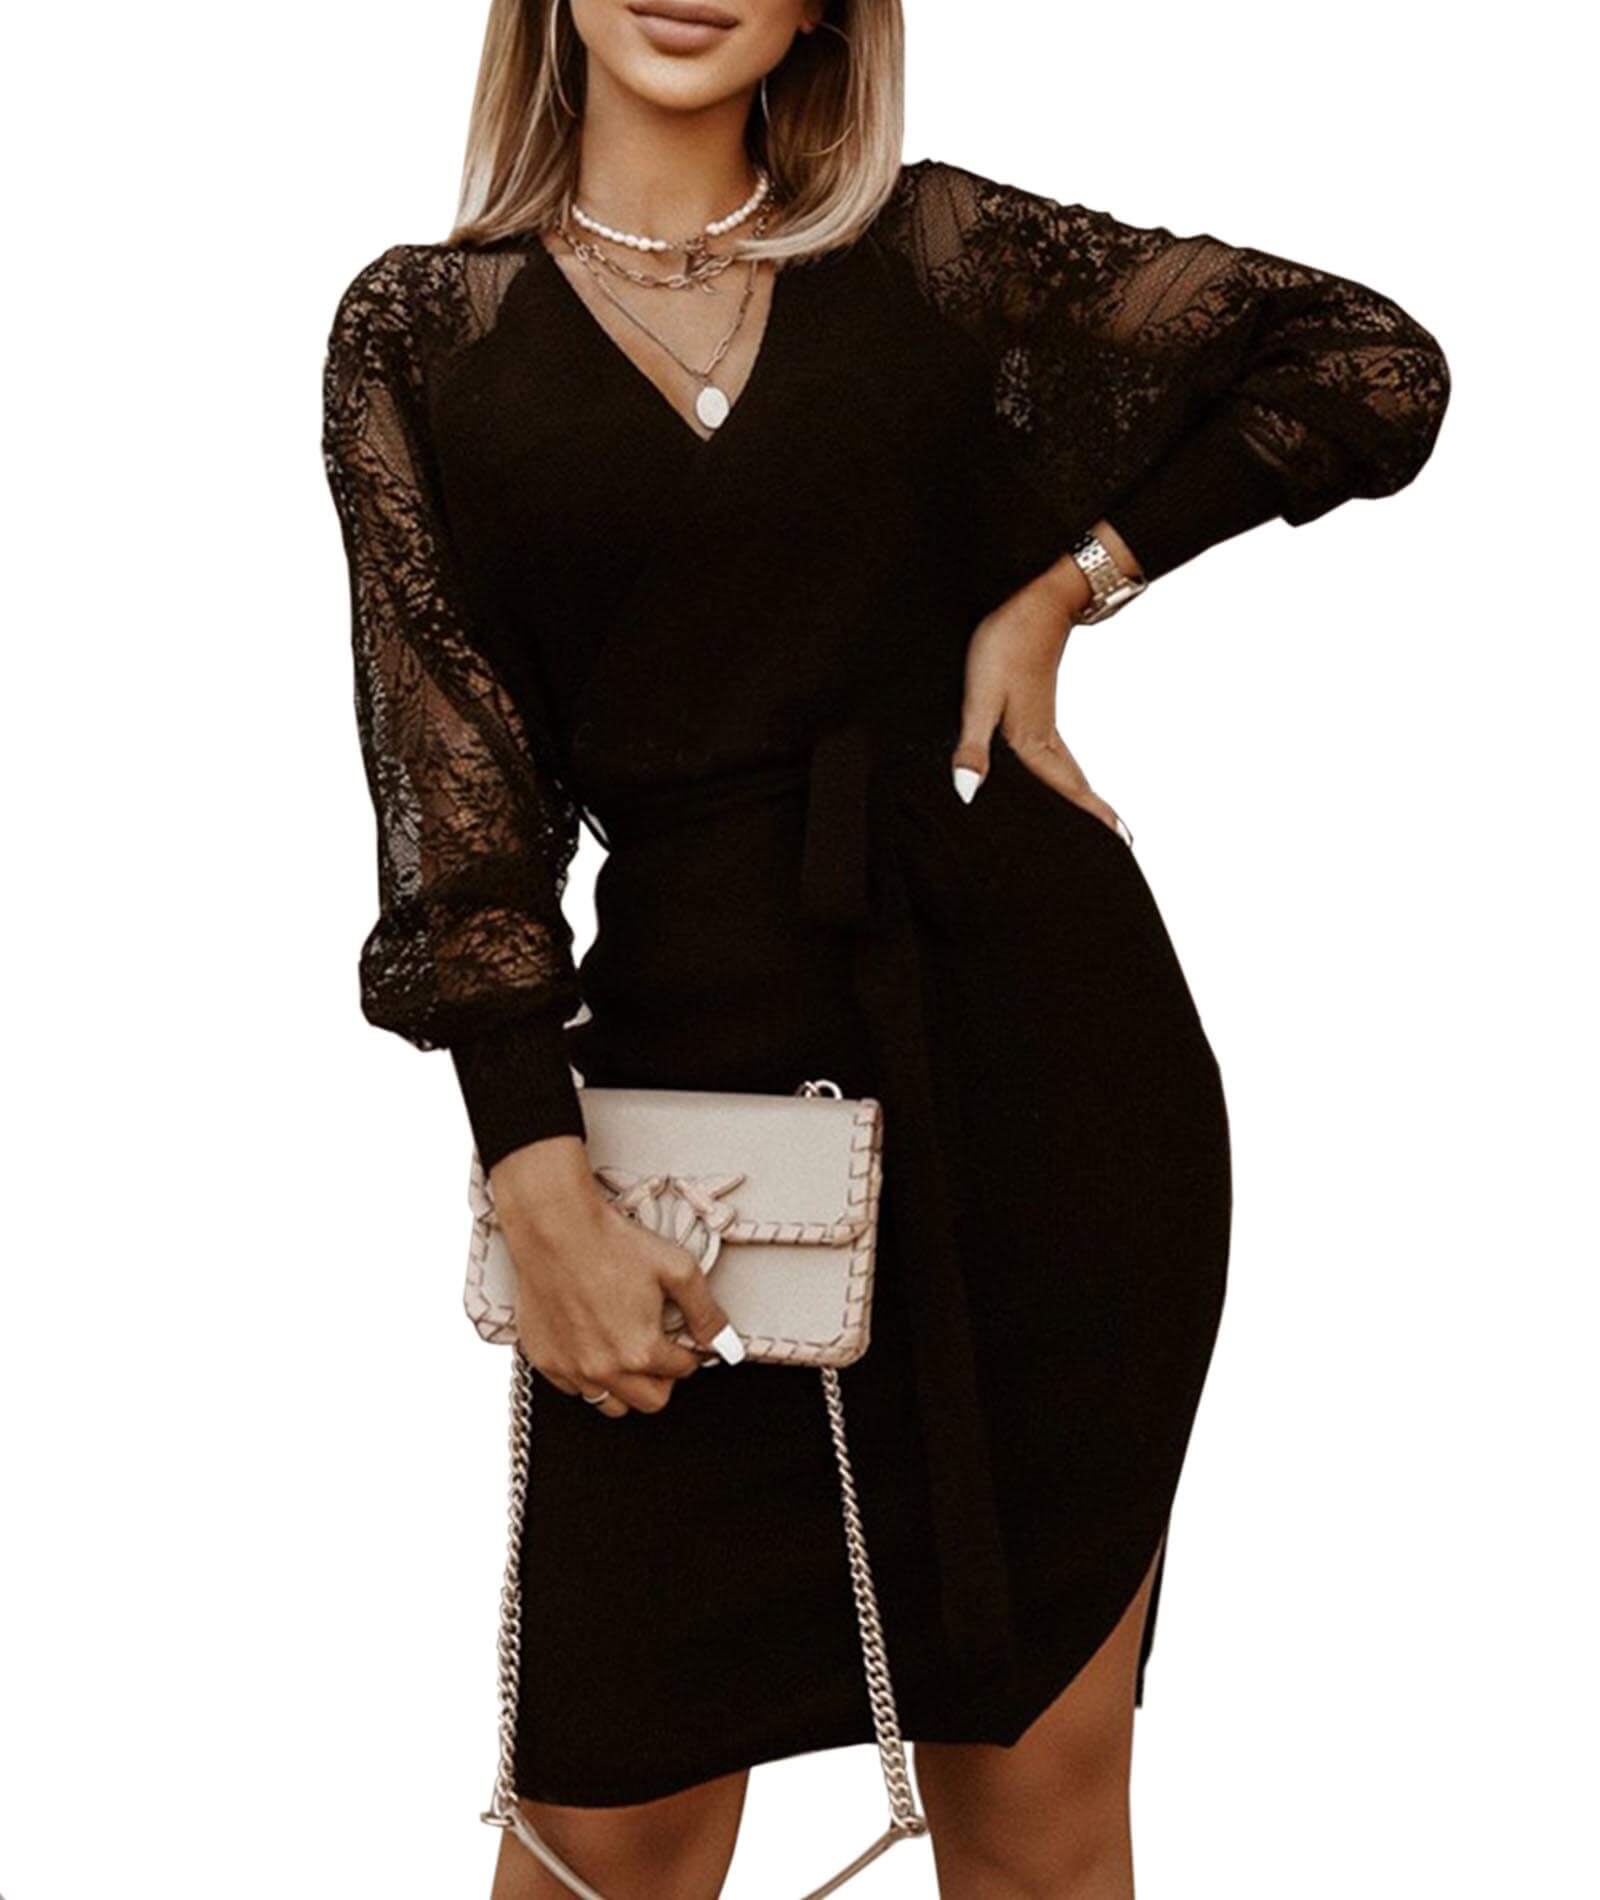  Women's Sweater Dresses Sexy V Neck Lace Patchwork Long Sleeves Bodycon Wrap Dress with Belt